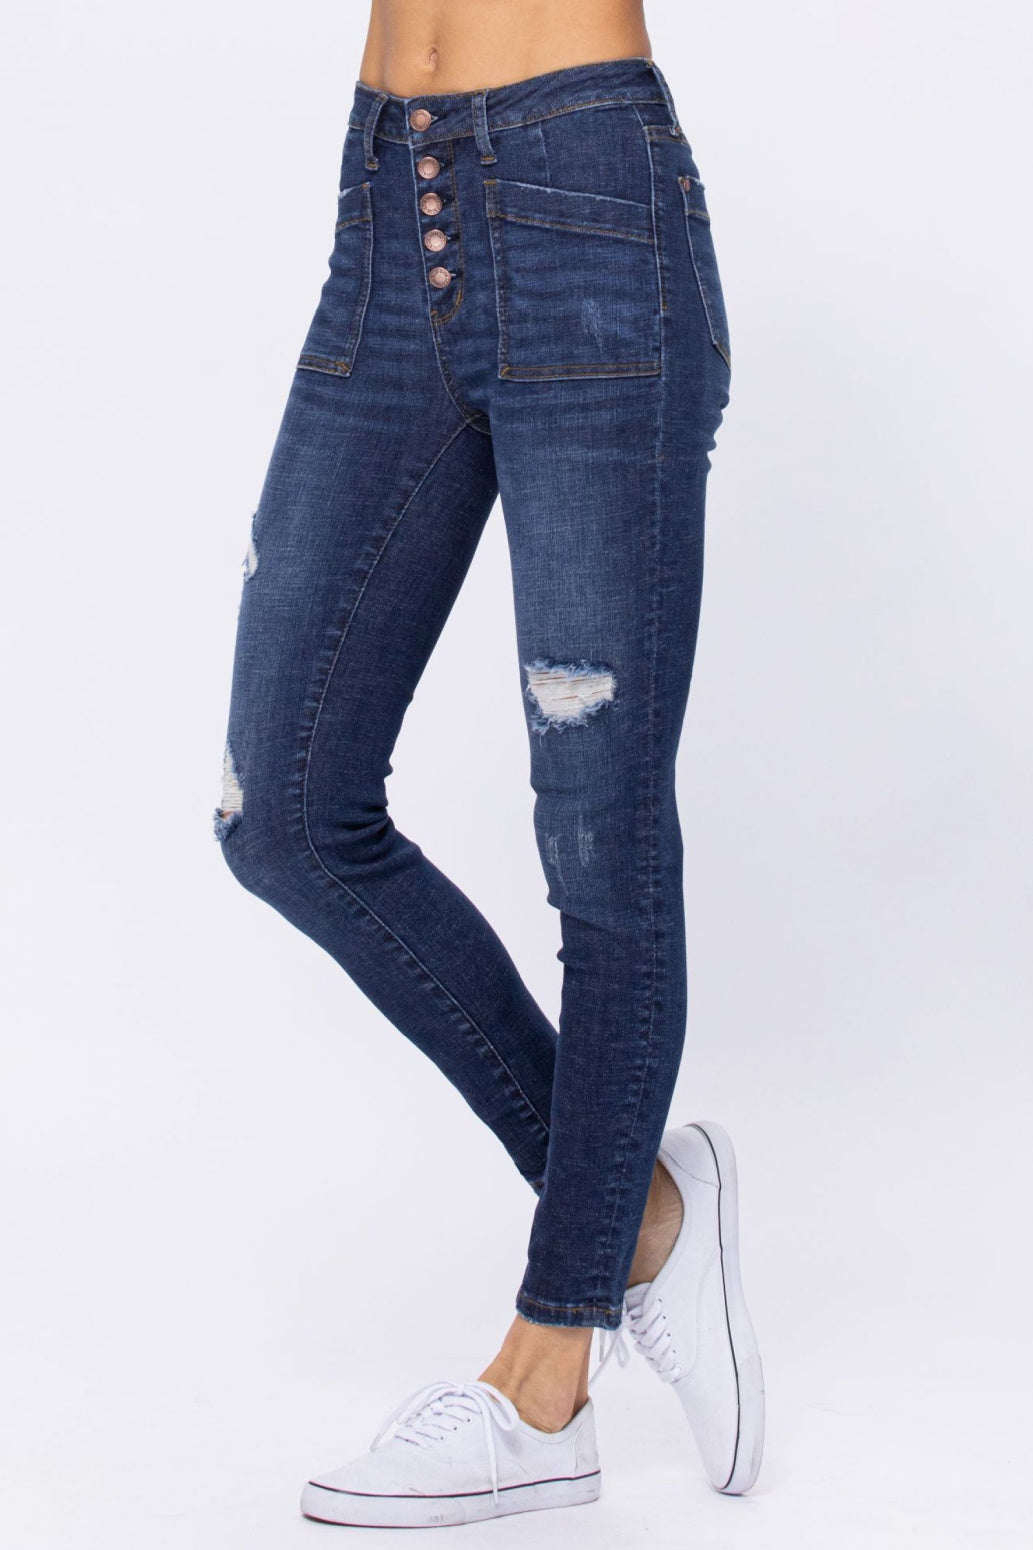 Judy Blue High Waist Patch Of Cargo Skinny Jeans 88365 - Exclusive-Jeans-Sunshine and Wine Boutique